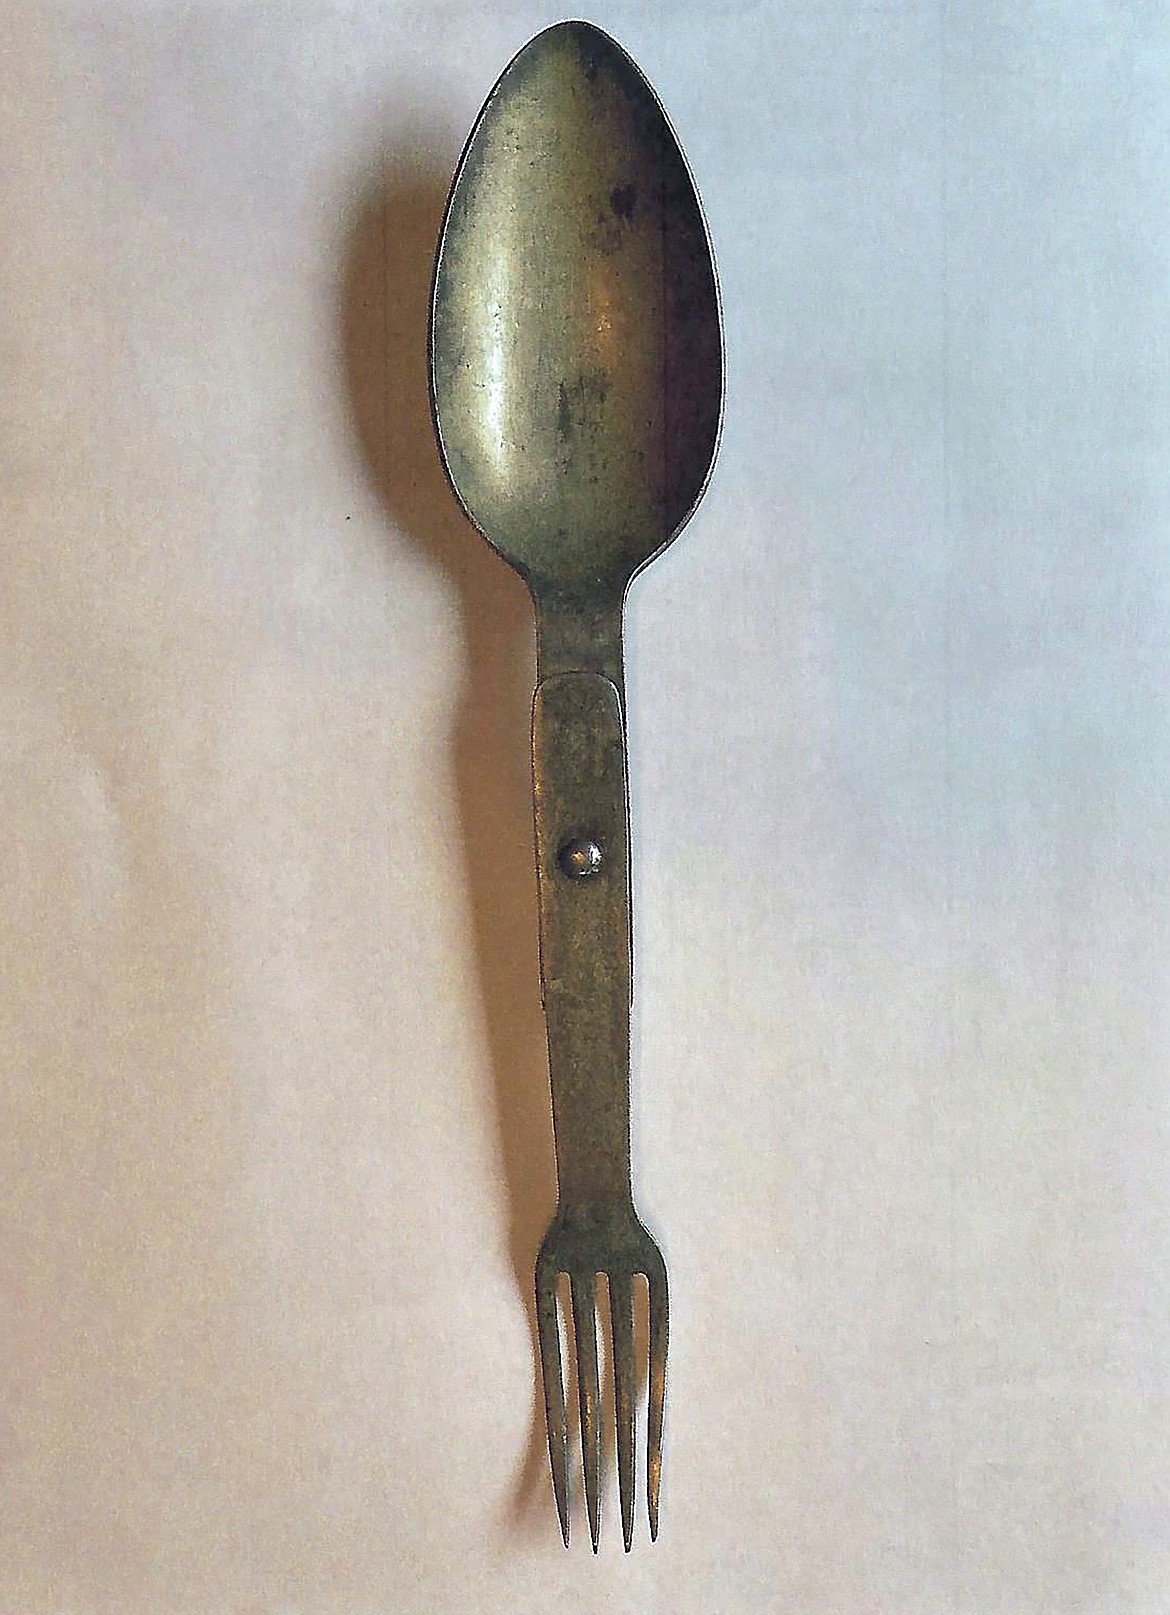 A memento of Harry F. Clark's time in the Argonne Offensive. From the mess kit of a fallen German soldier, the item is spoon-fork hinged combination, and is now over 100 years old.